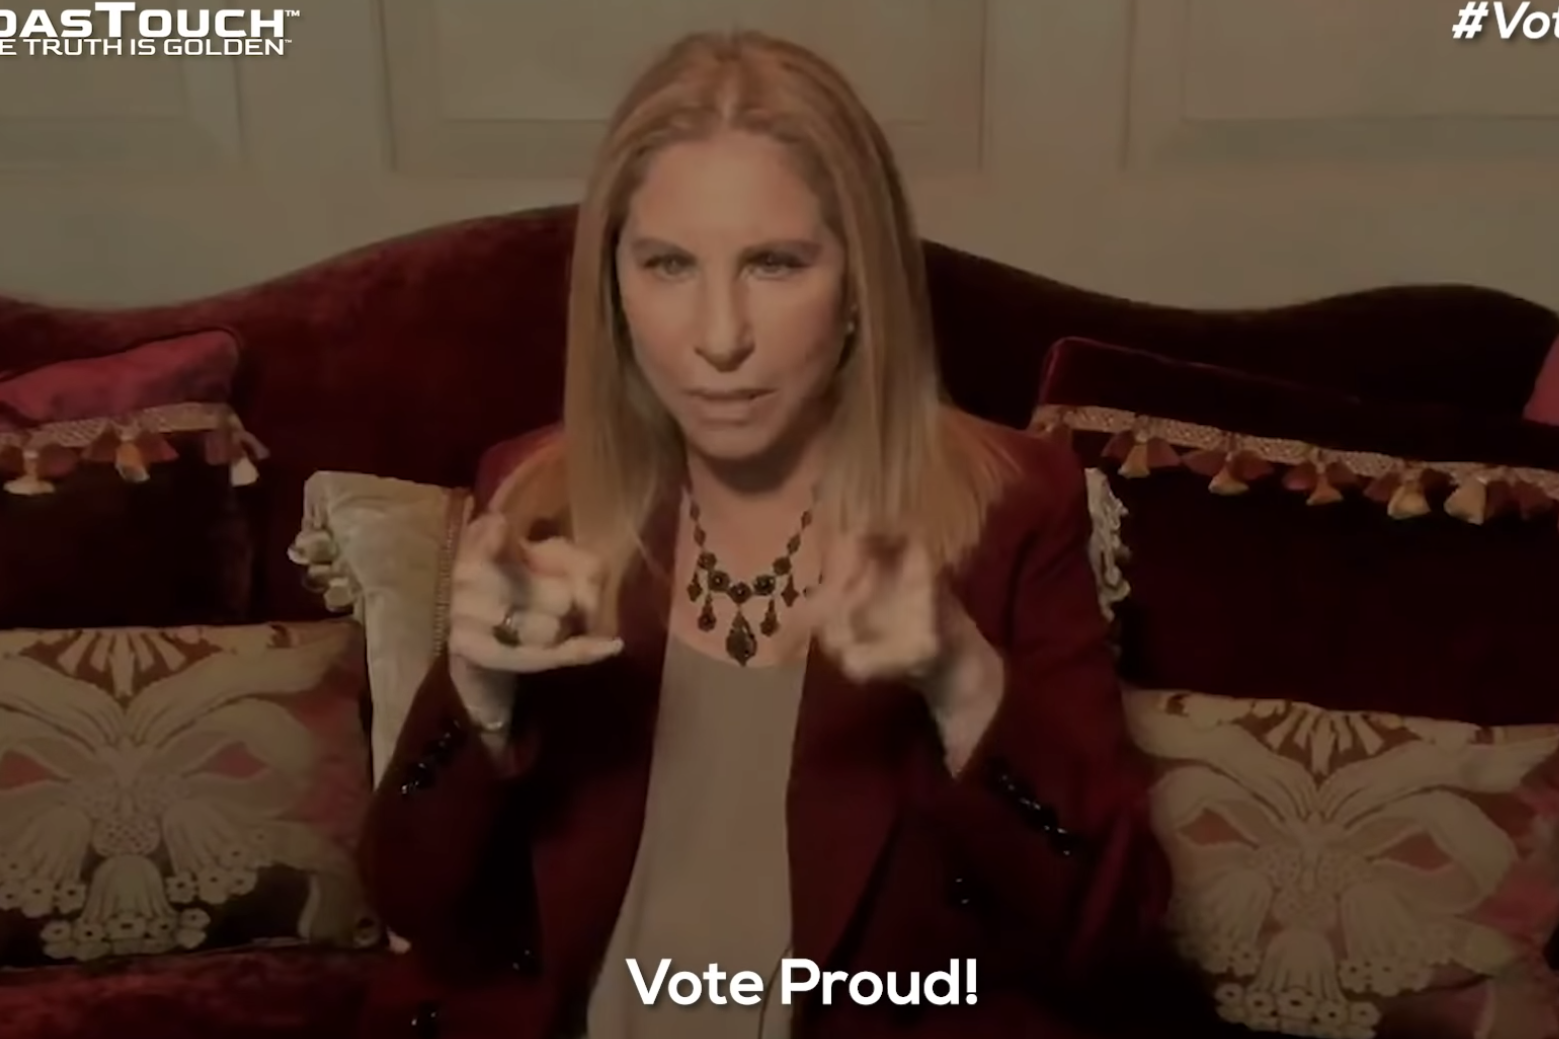 Barbra Streisand in a new political ad aiming to mobilise LGBTQ voters.